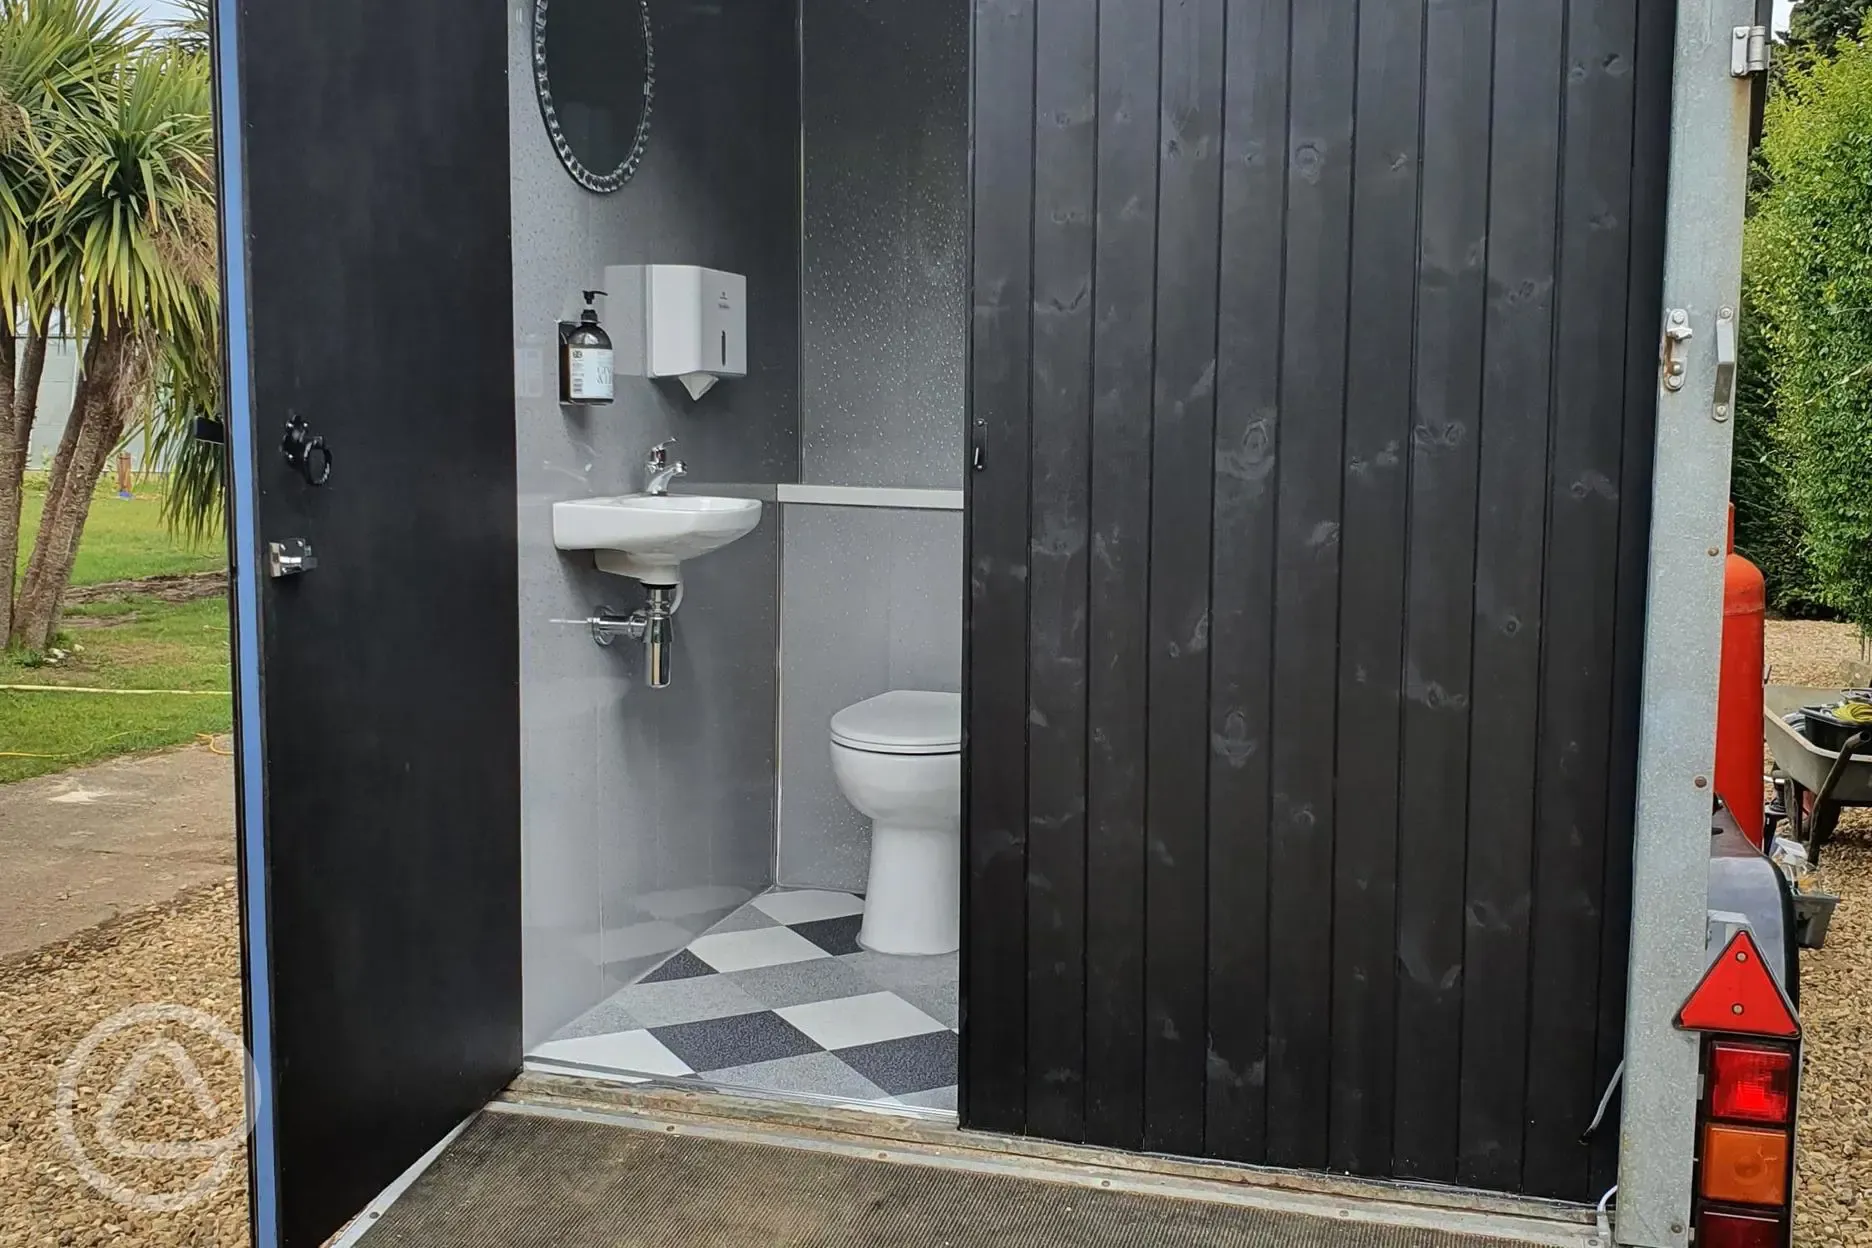 Converted horse box shower rooms